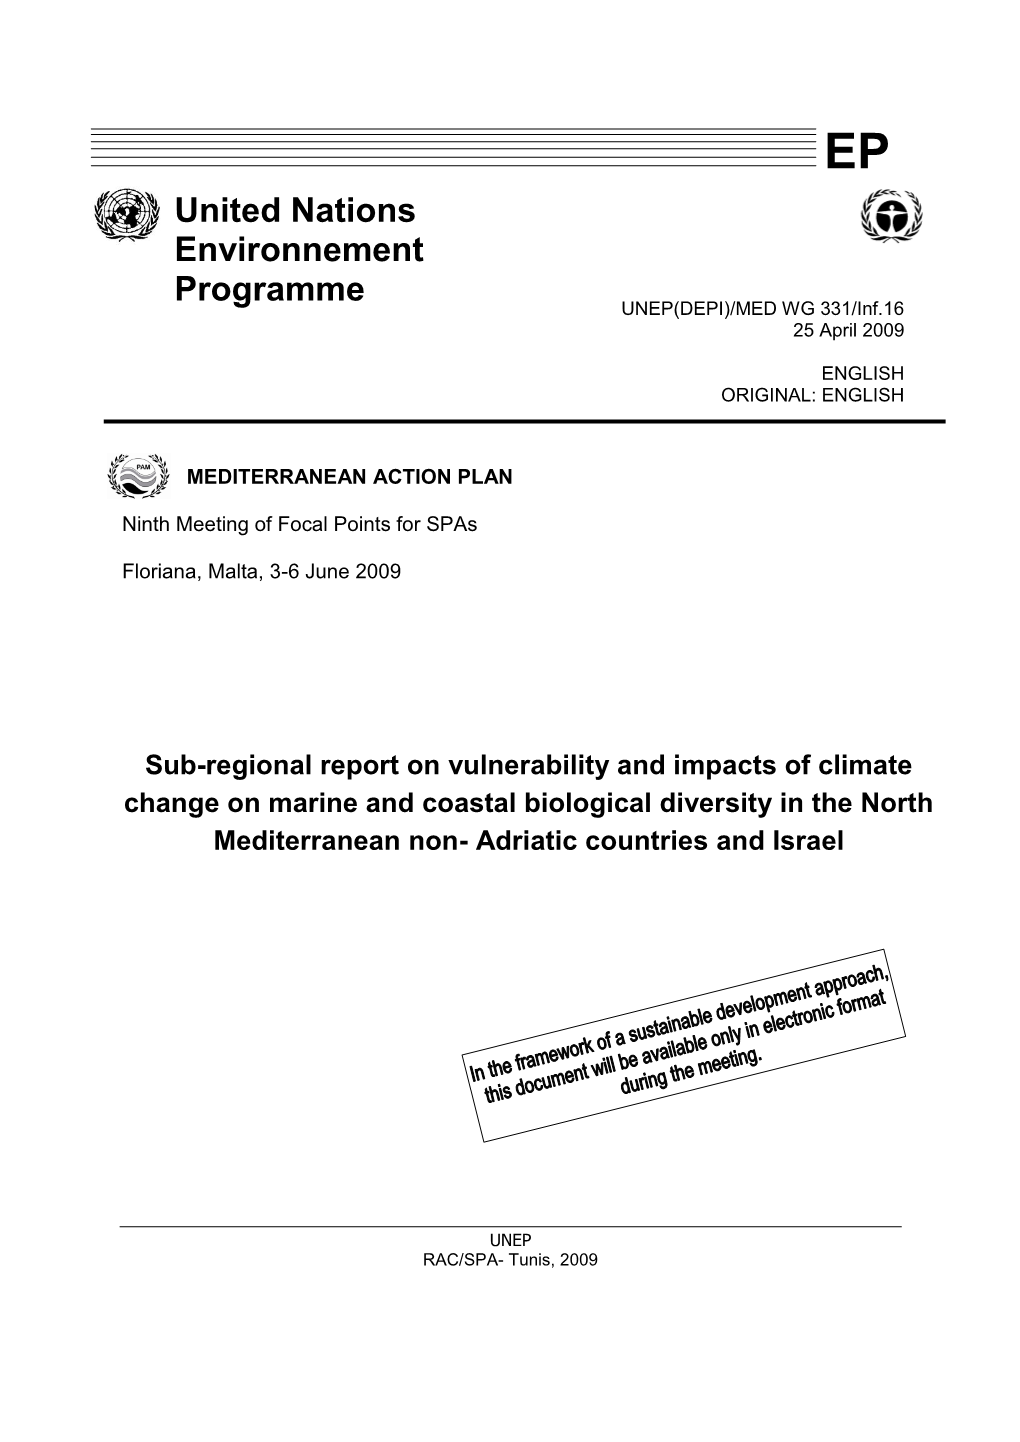 Sub-Regional Report on Vulnerability and Impacts of Climate Change on Marine and Coastal Biological Diversity